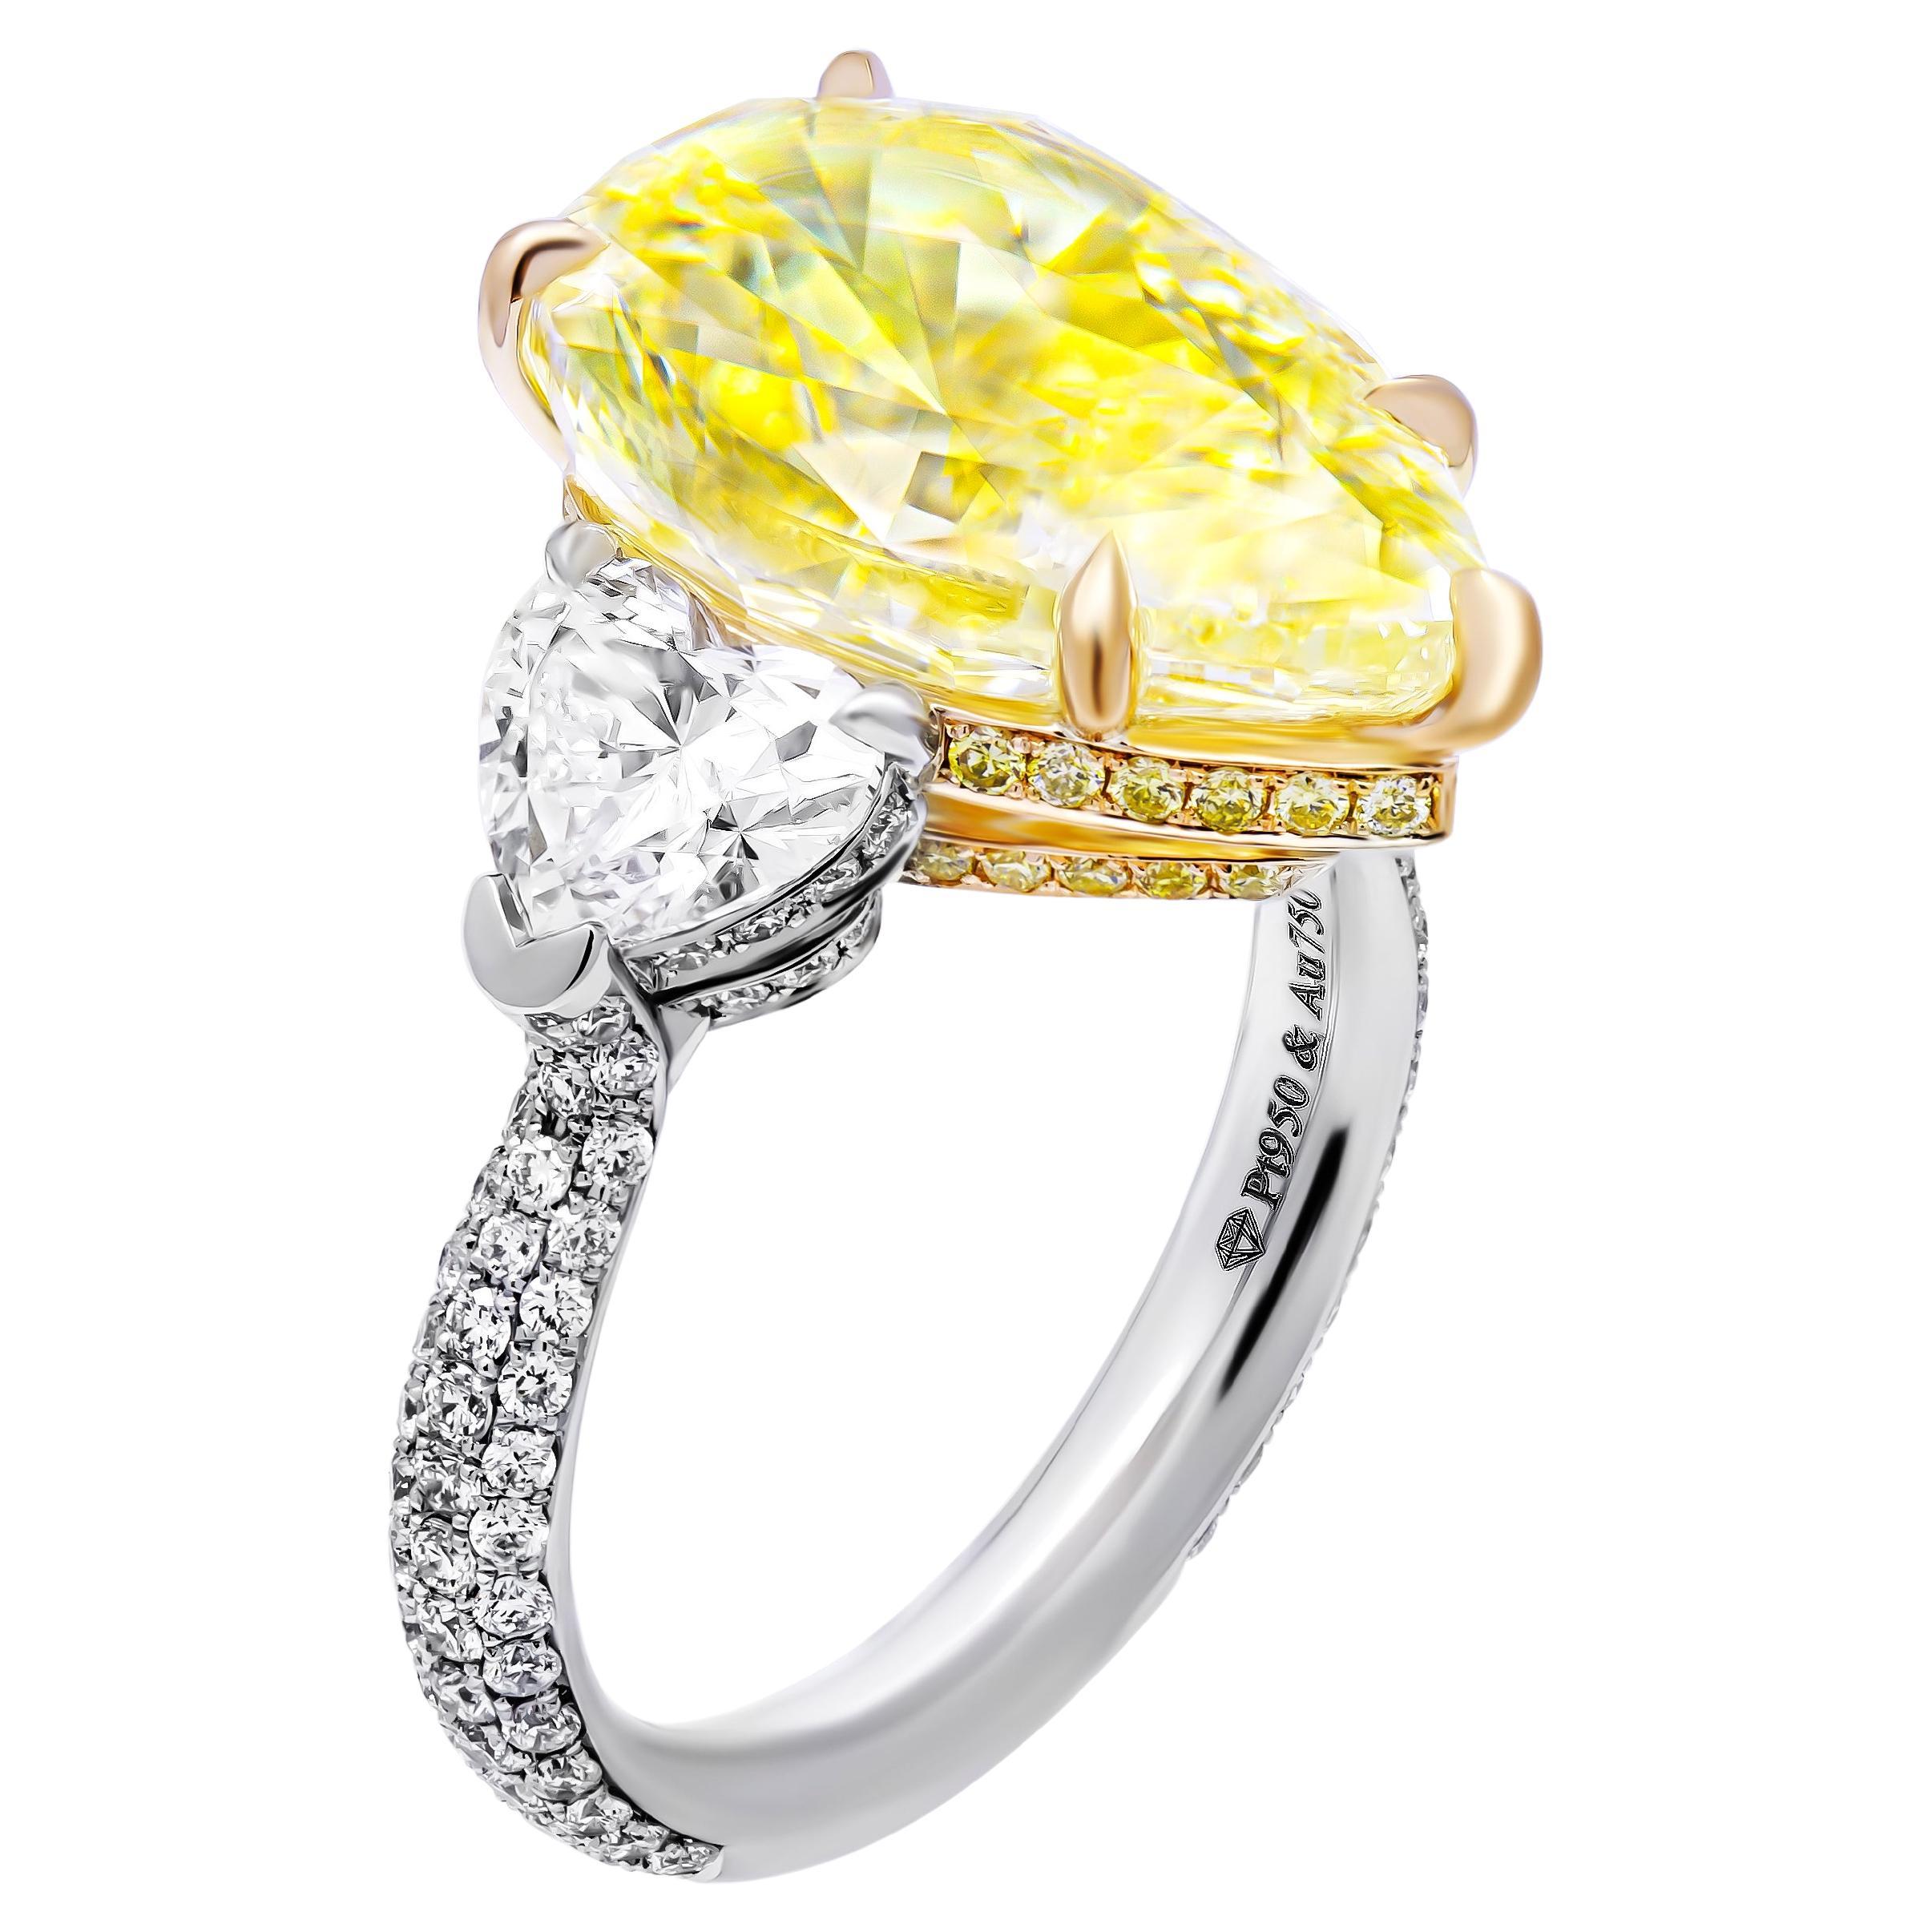 GIA Certified 3 Stone ring with 7.78ct Fancy Yellow Pear Shape Diamond